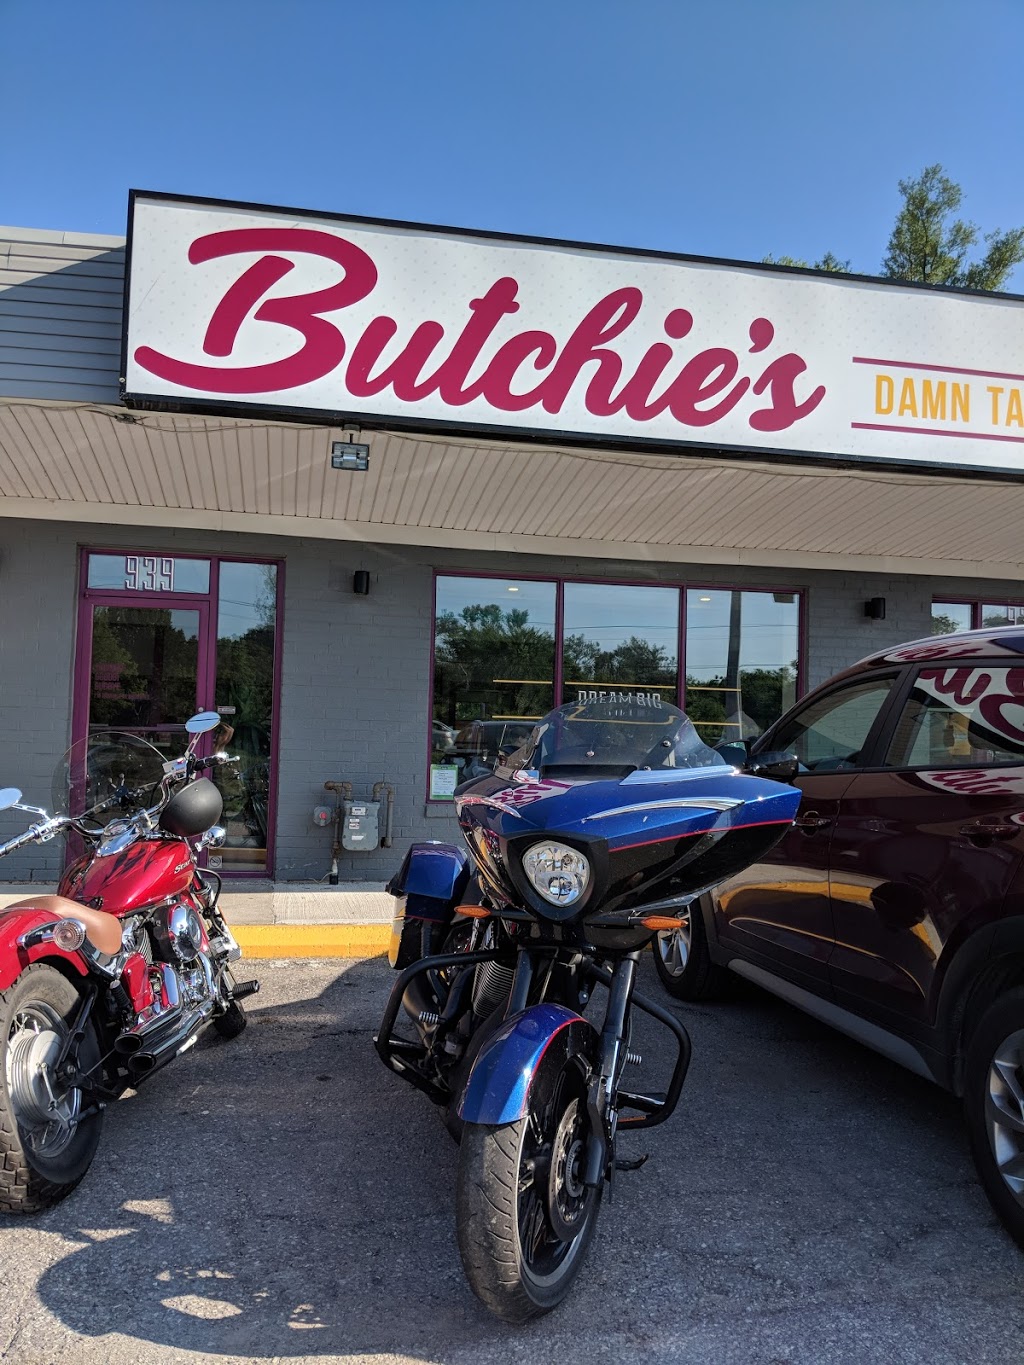 Butchies | restaurant | 939 Dundas St W, Whitby, ON L1N 2N8, Canada | 9054449991 OR +1 905-444-9991